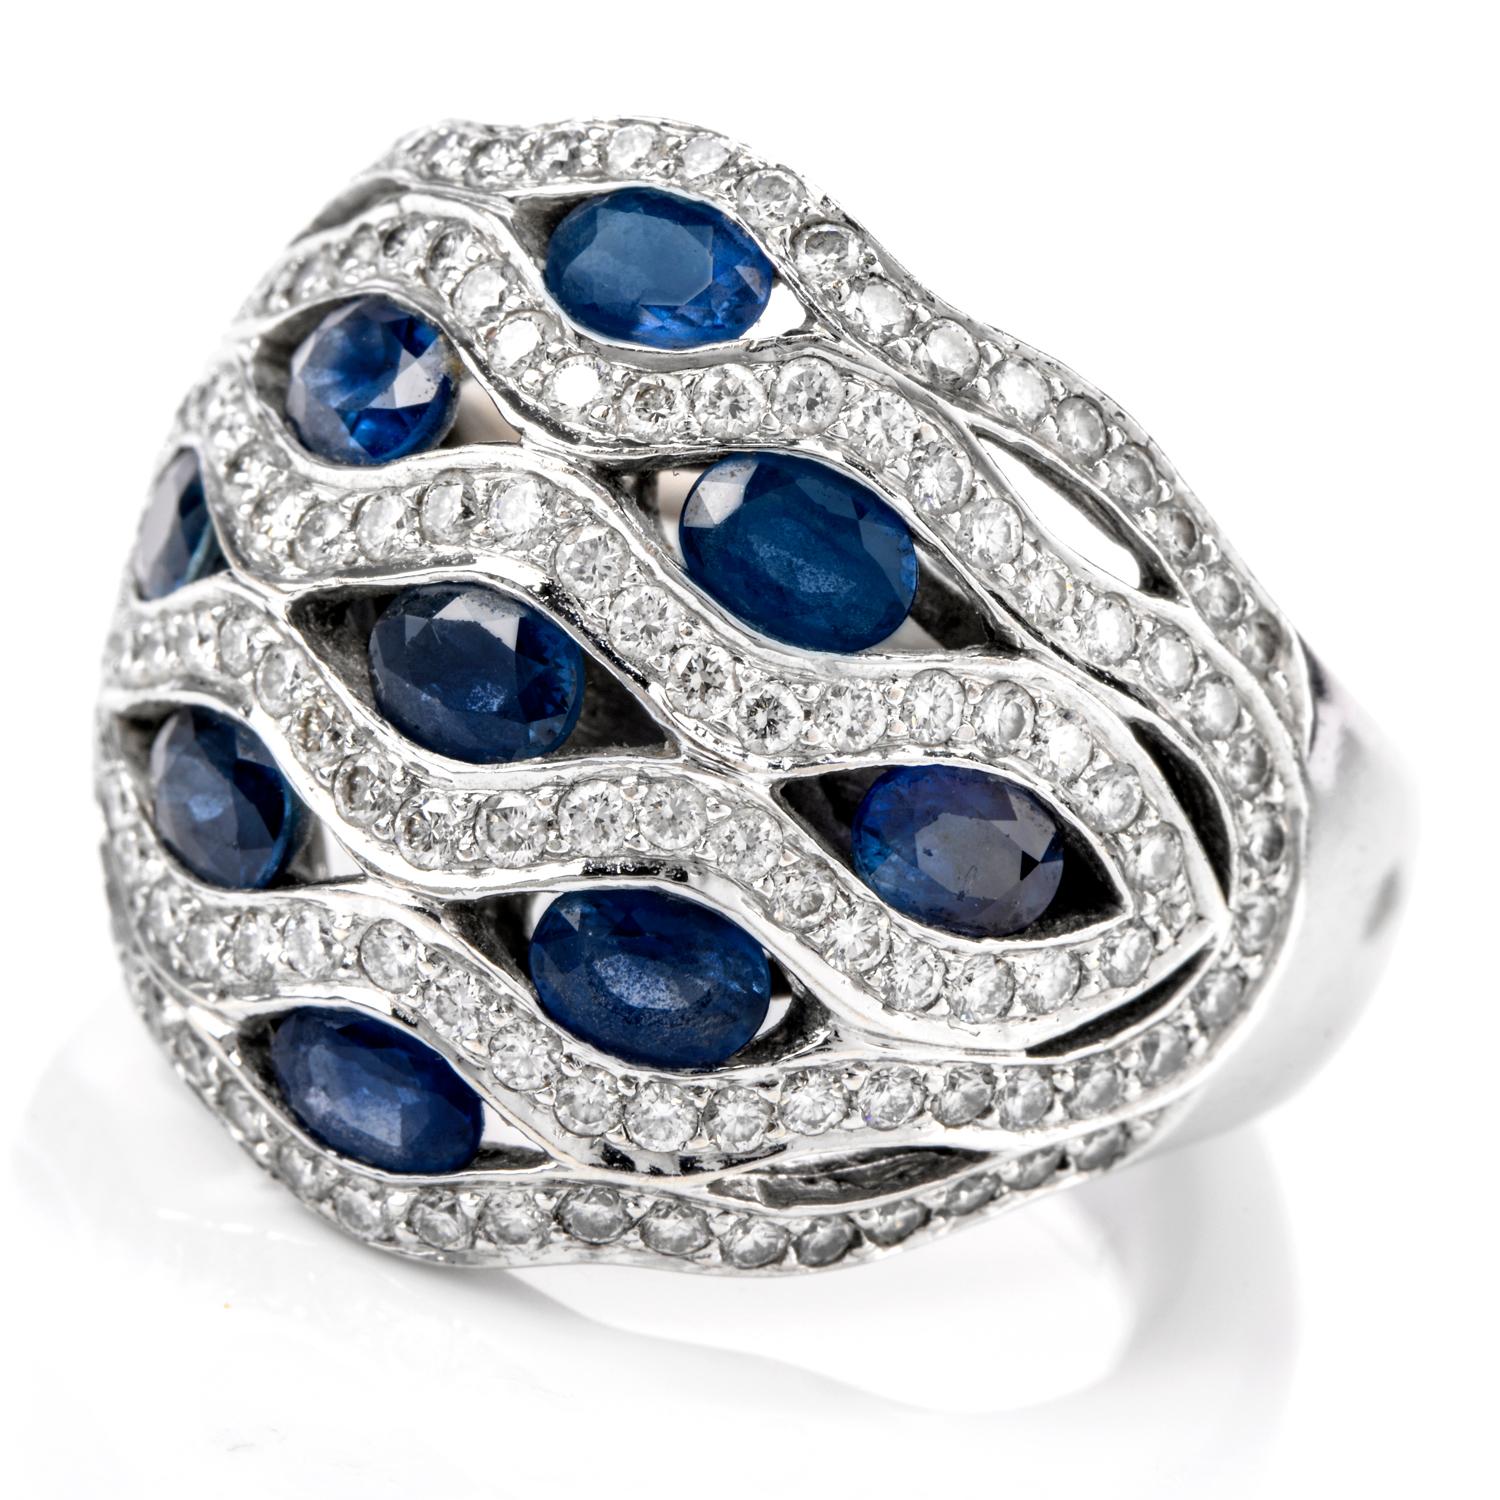 This stunning Diamond and Sapphire Dome ring was inspired in a 

flowing water motif and crafted in 18K white gold. 

Vibrant blue oval shaped Sapphire run vertically across

the finger throughout the waves of white Diamonds.

Diamonds weigh appx.